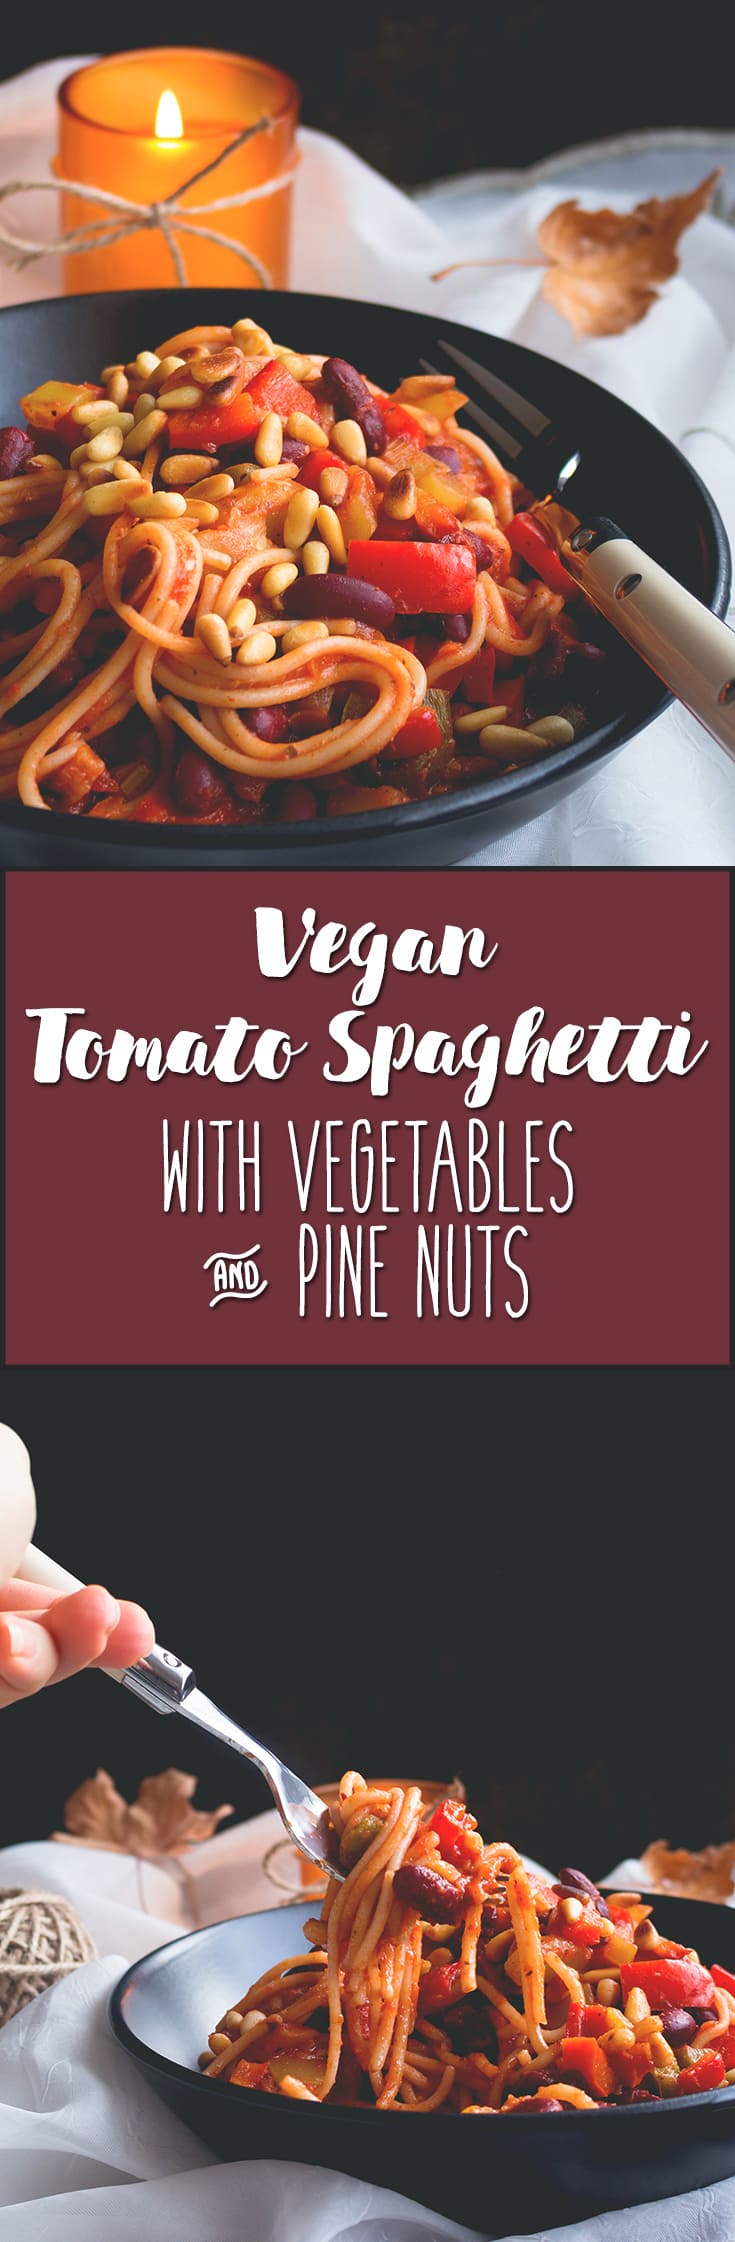 Tomato Spaghetti with Vegetables and Pine Nuts. Vegan & GF made with brown rice pasta, veggies, beans, pine nuts, and tomato sauce. Easy, delicious and really comforting. YUM! | thehealthfulideas.com